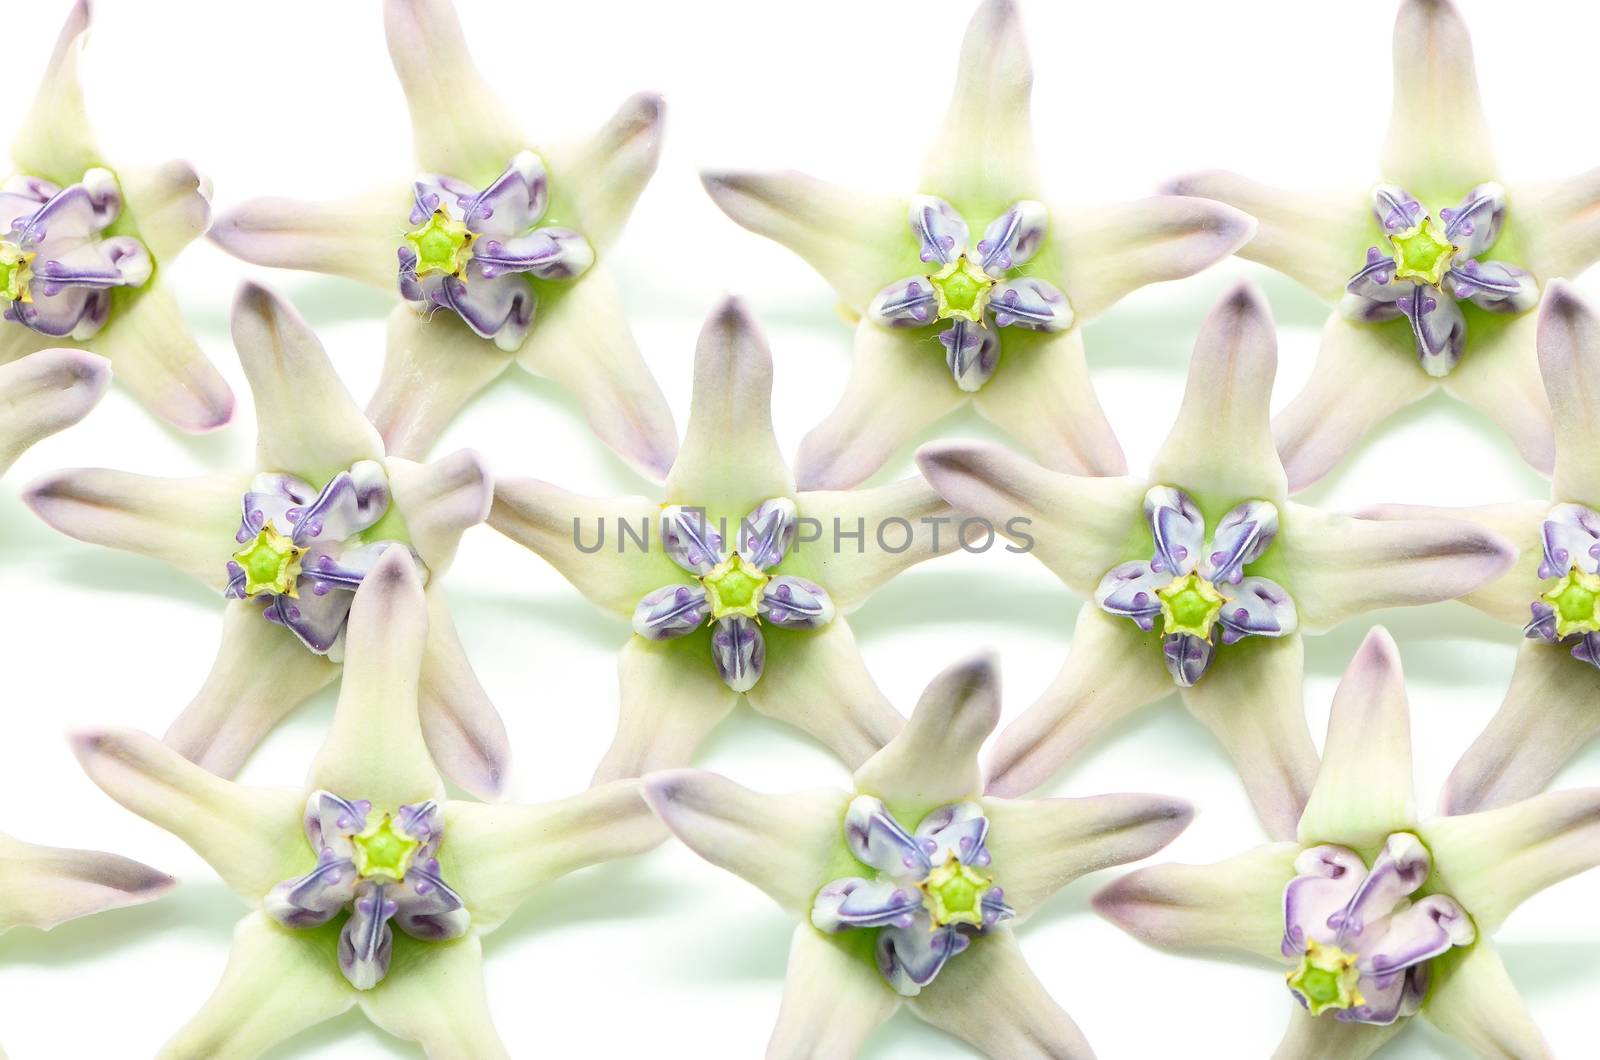 Petals and sepals of white and purple flower, Crown Flower, Giant Indian Milkweed, Gigantic Swallowwort (Calotropis gigantea) isolated on a white background